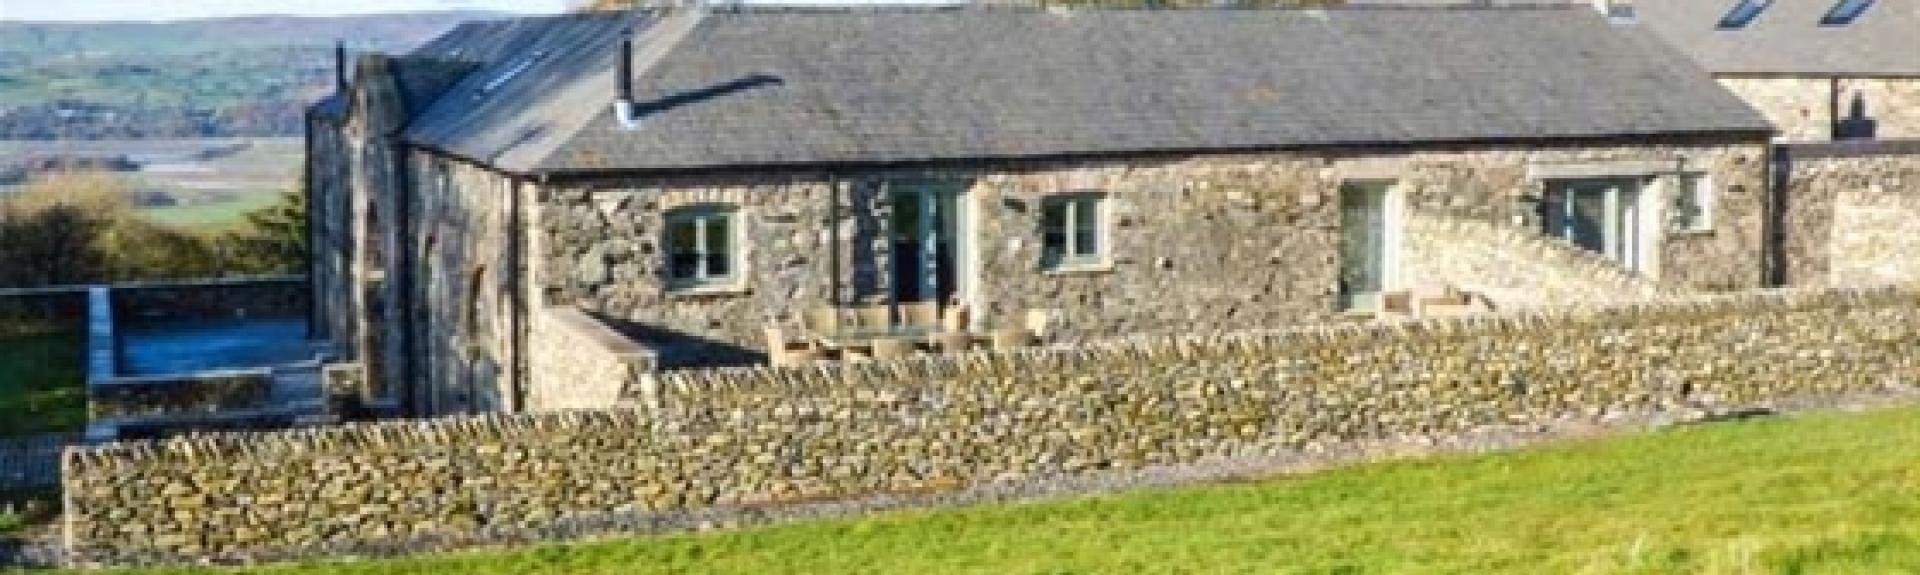 A single storey stone cottage sits behind a low stone wall.